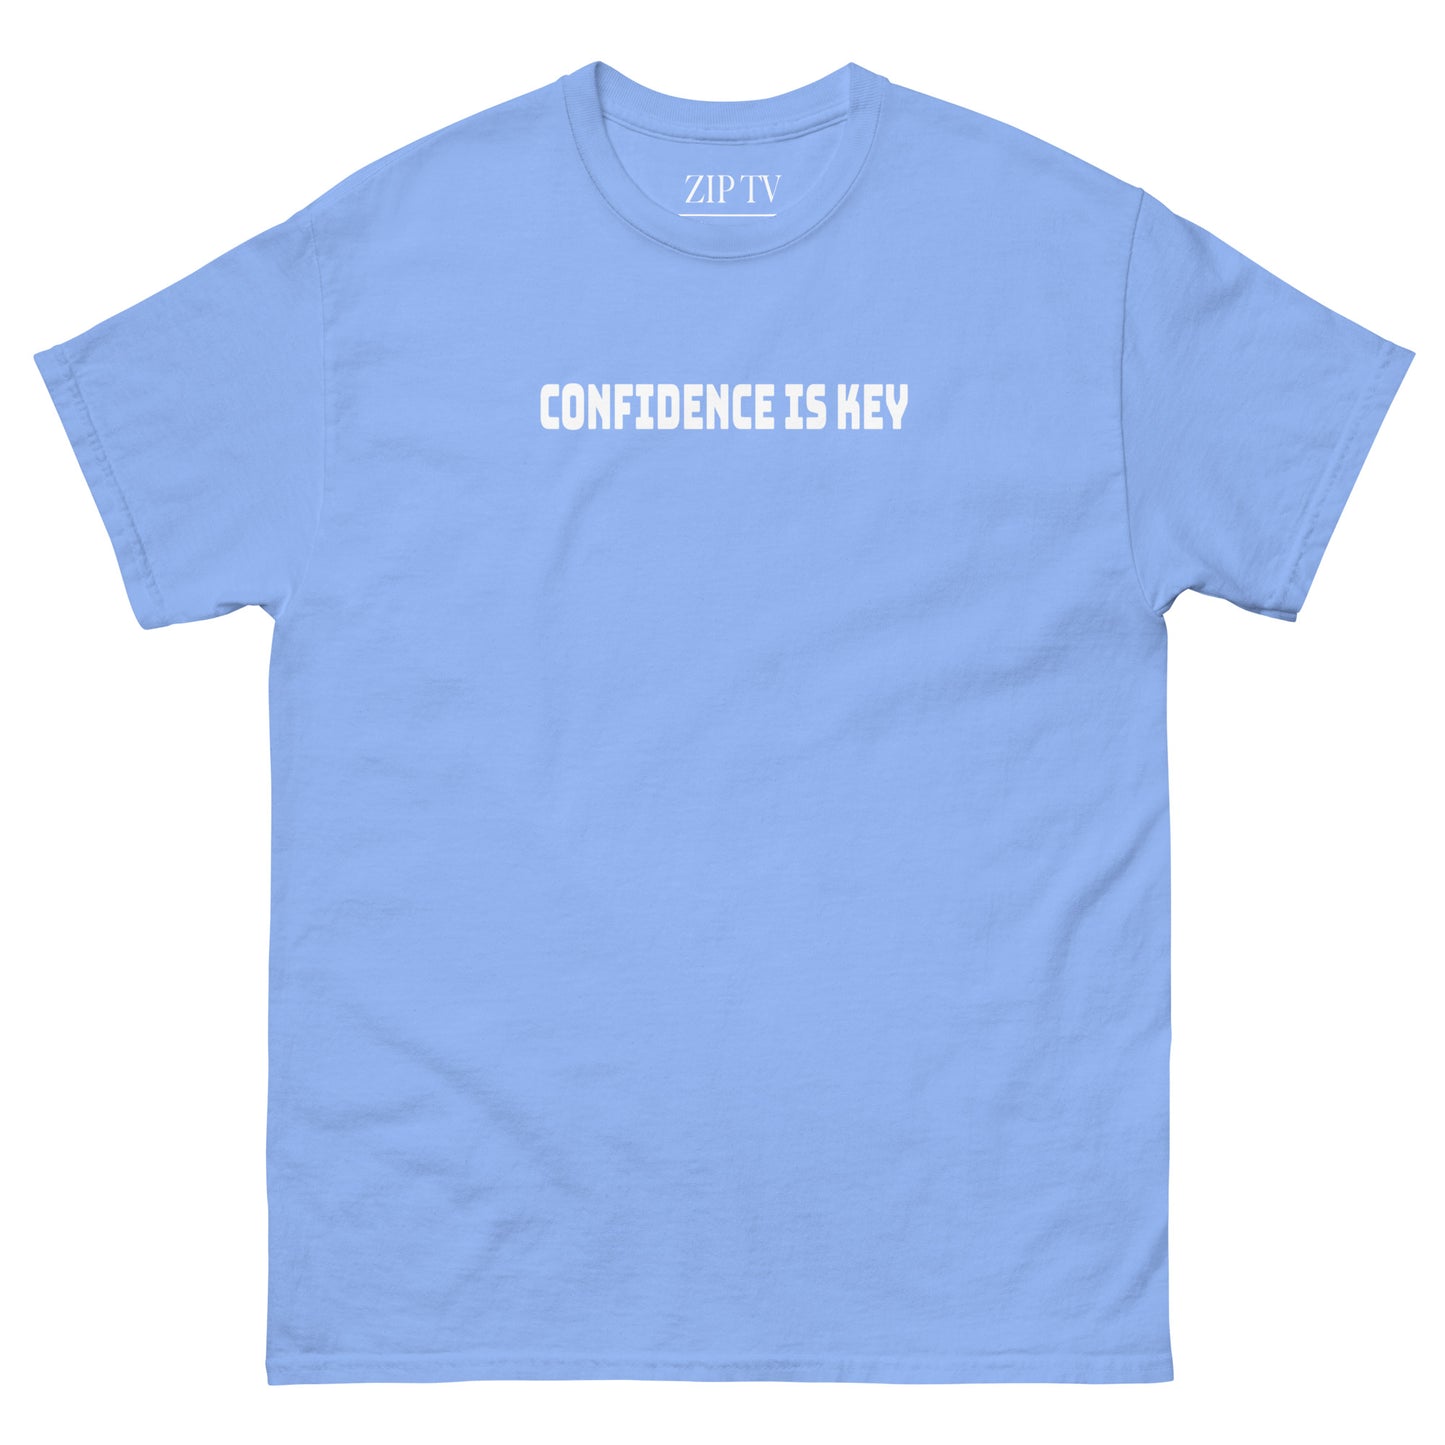 "Confidence is Key" T-Shirt w/ White Lettering